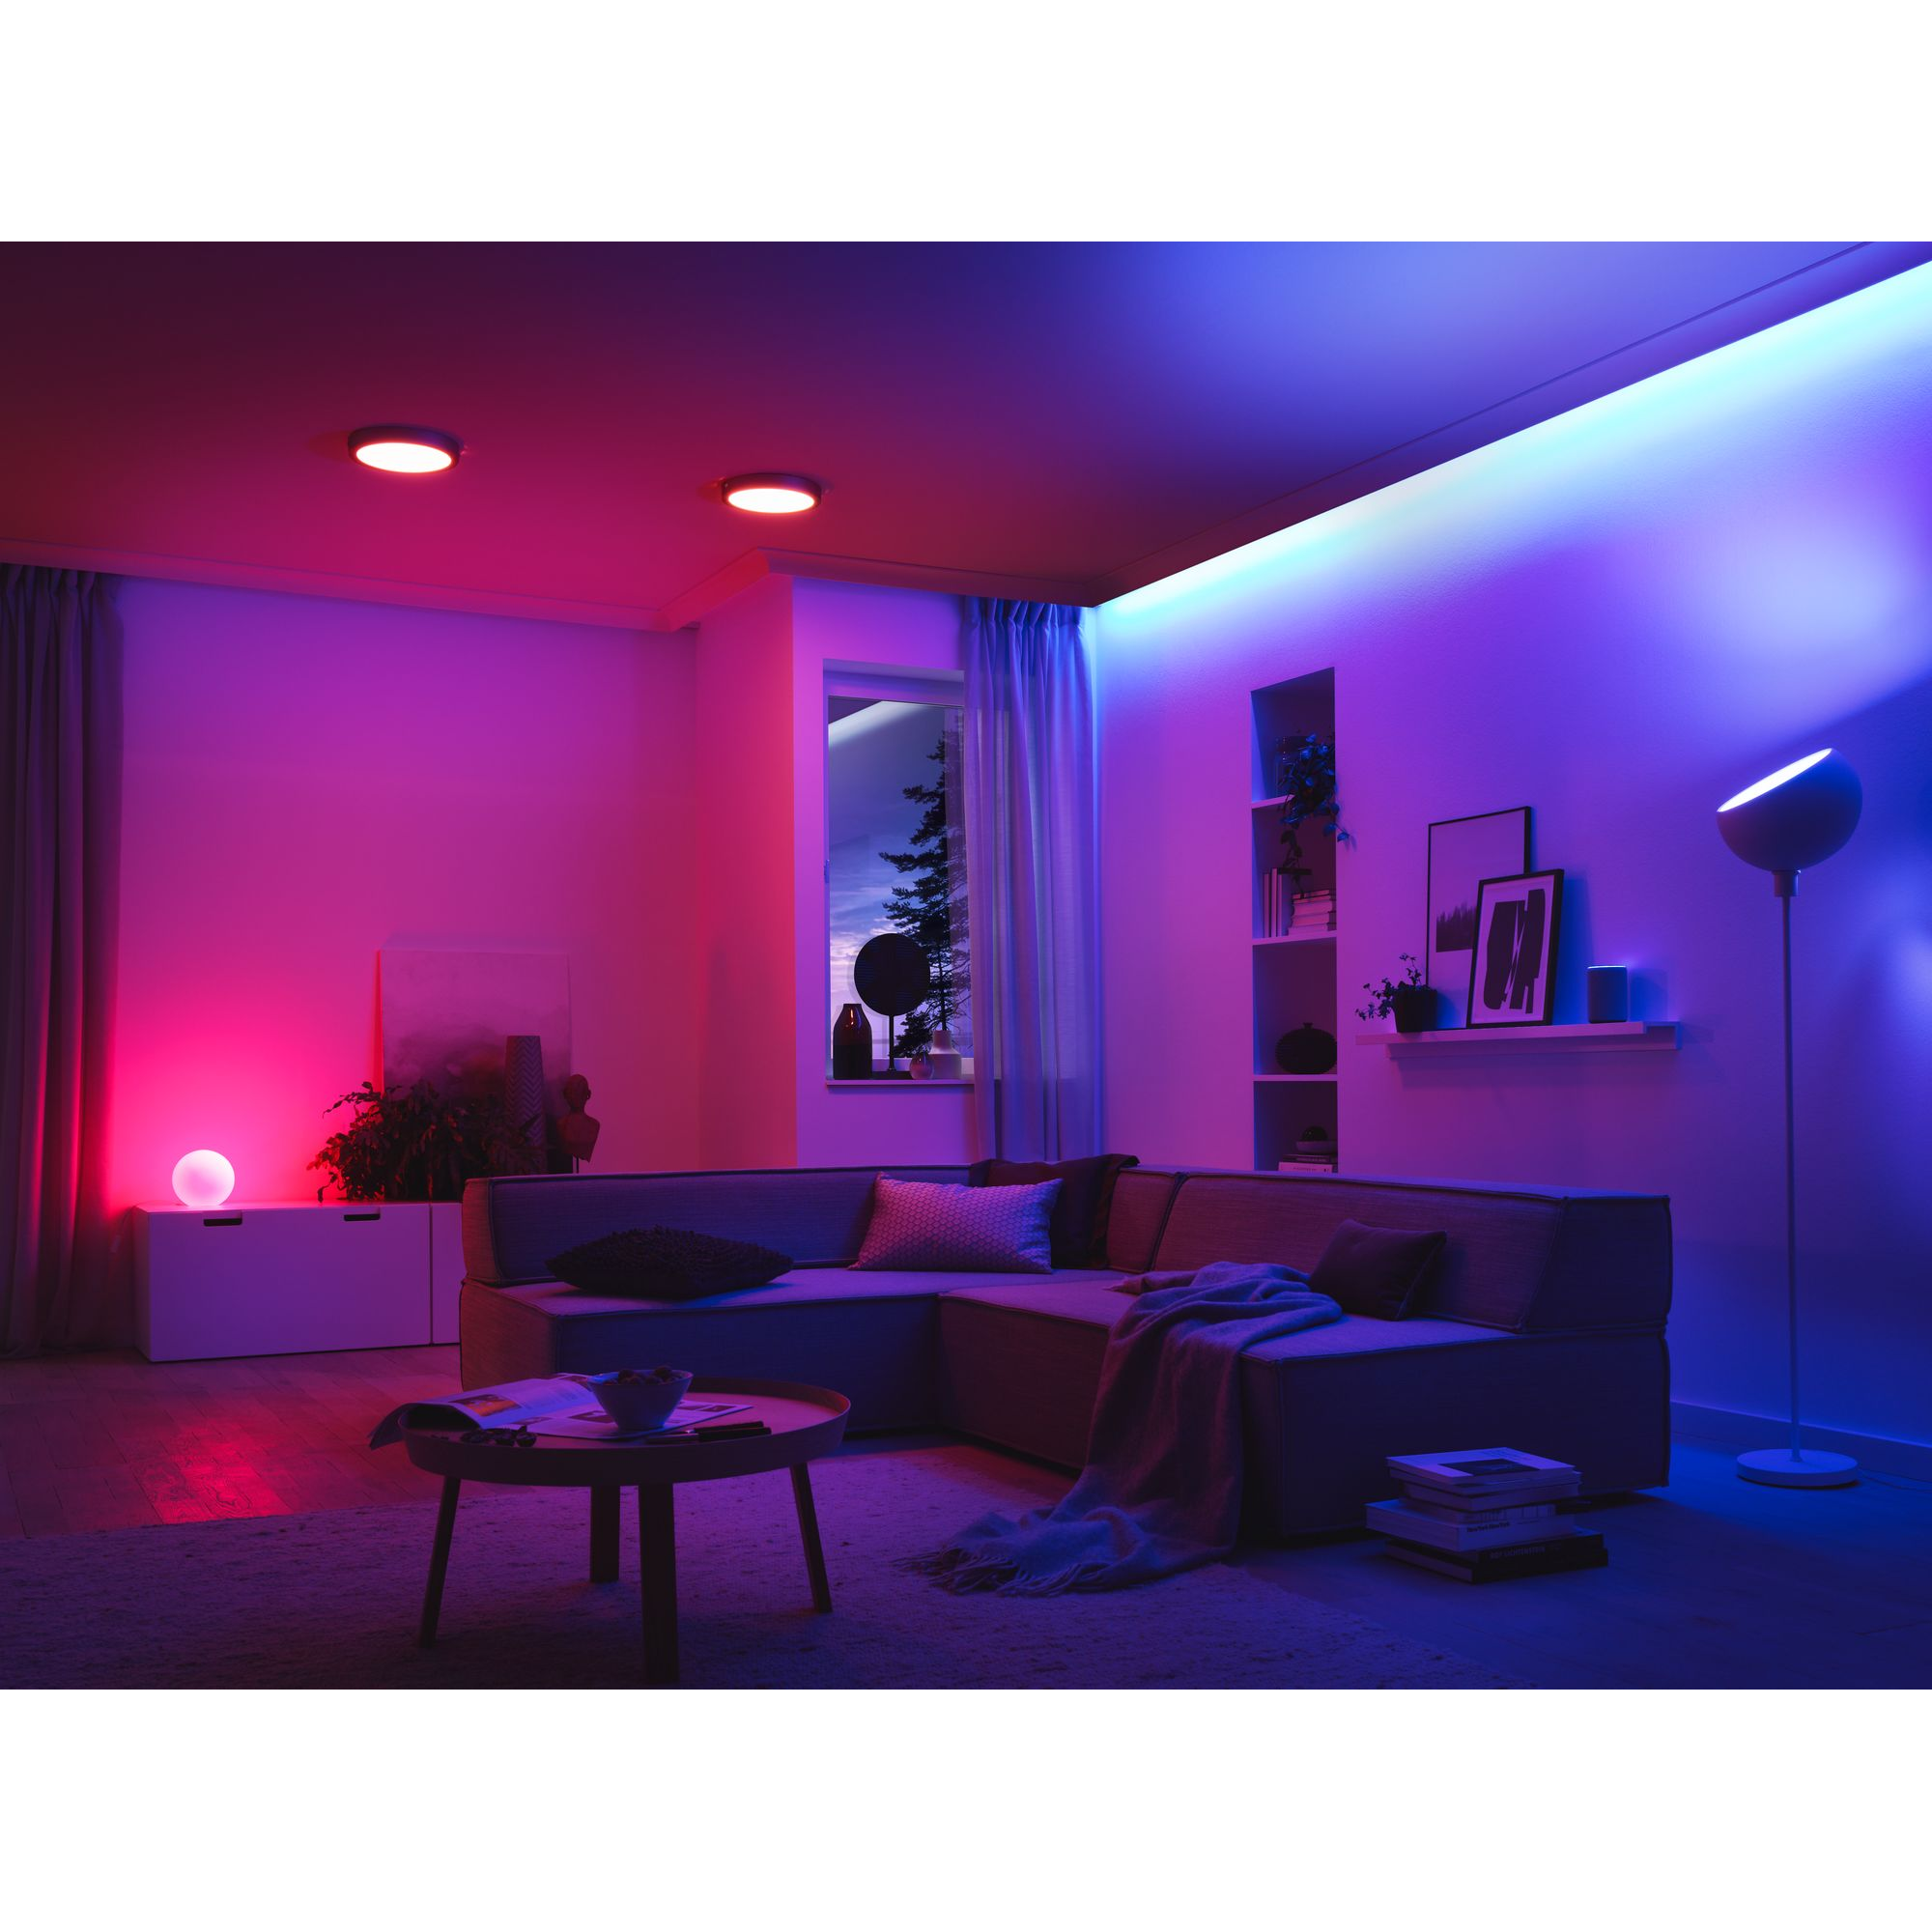 RGBW-Controller 'SmartHome MaxLED' max. 144 W 24 V weiß/grau + product picture